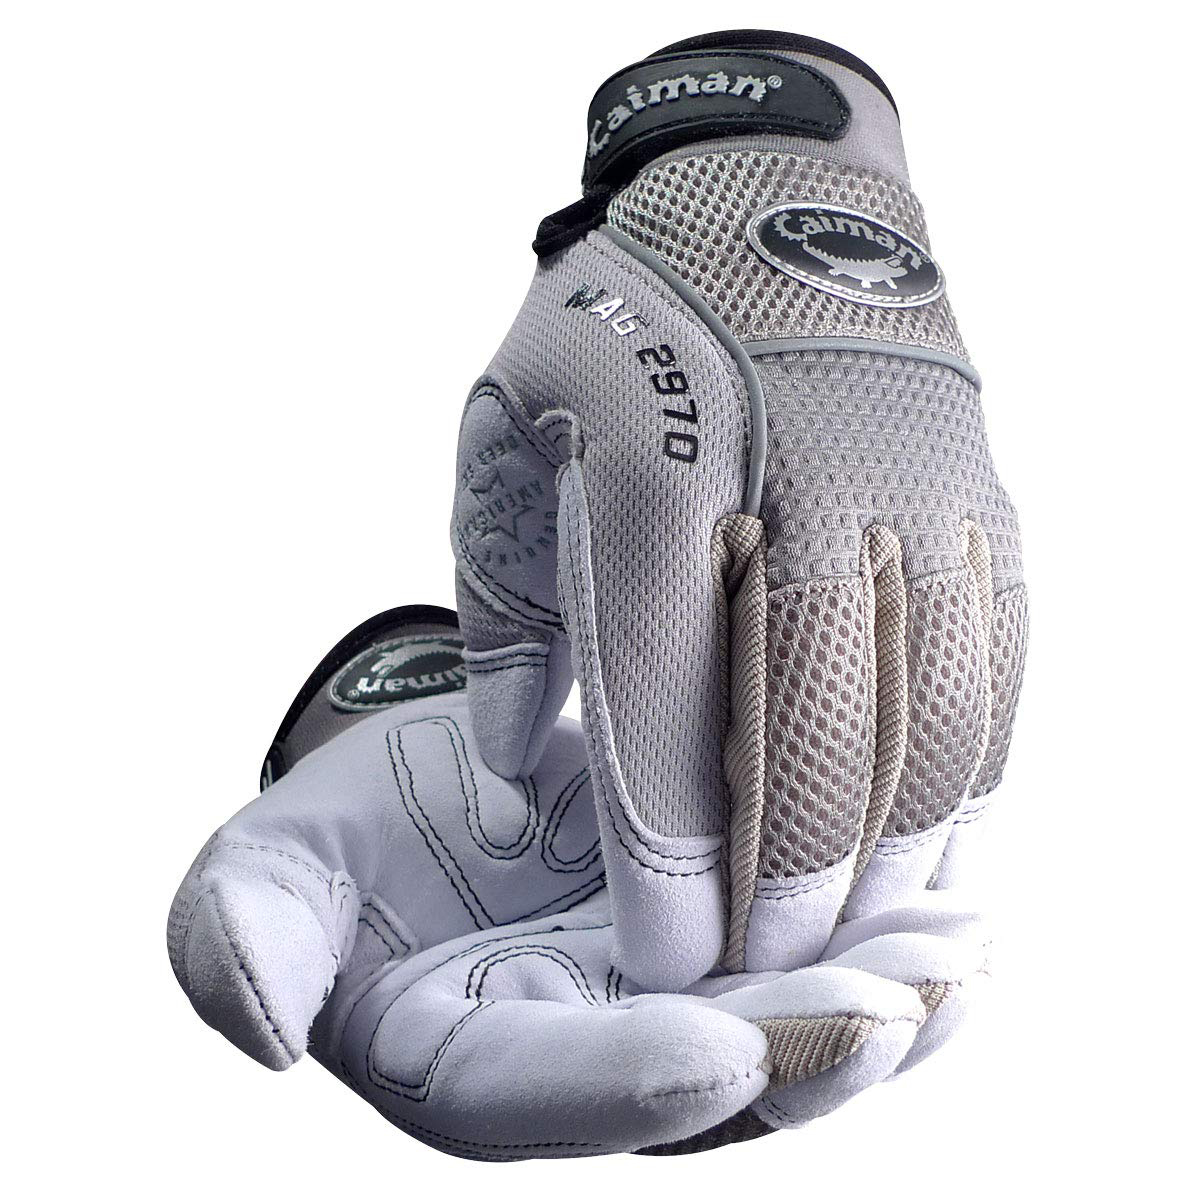 Knuckle Protection Mechanics Gloves Padded Palm